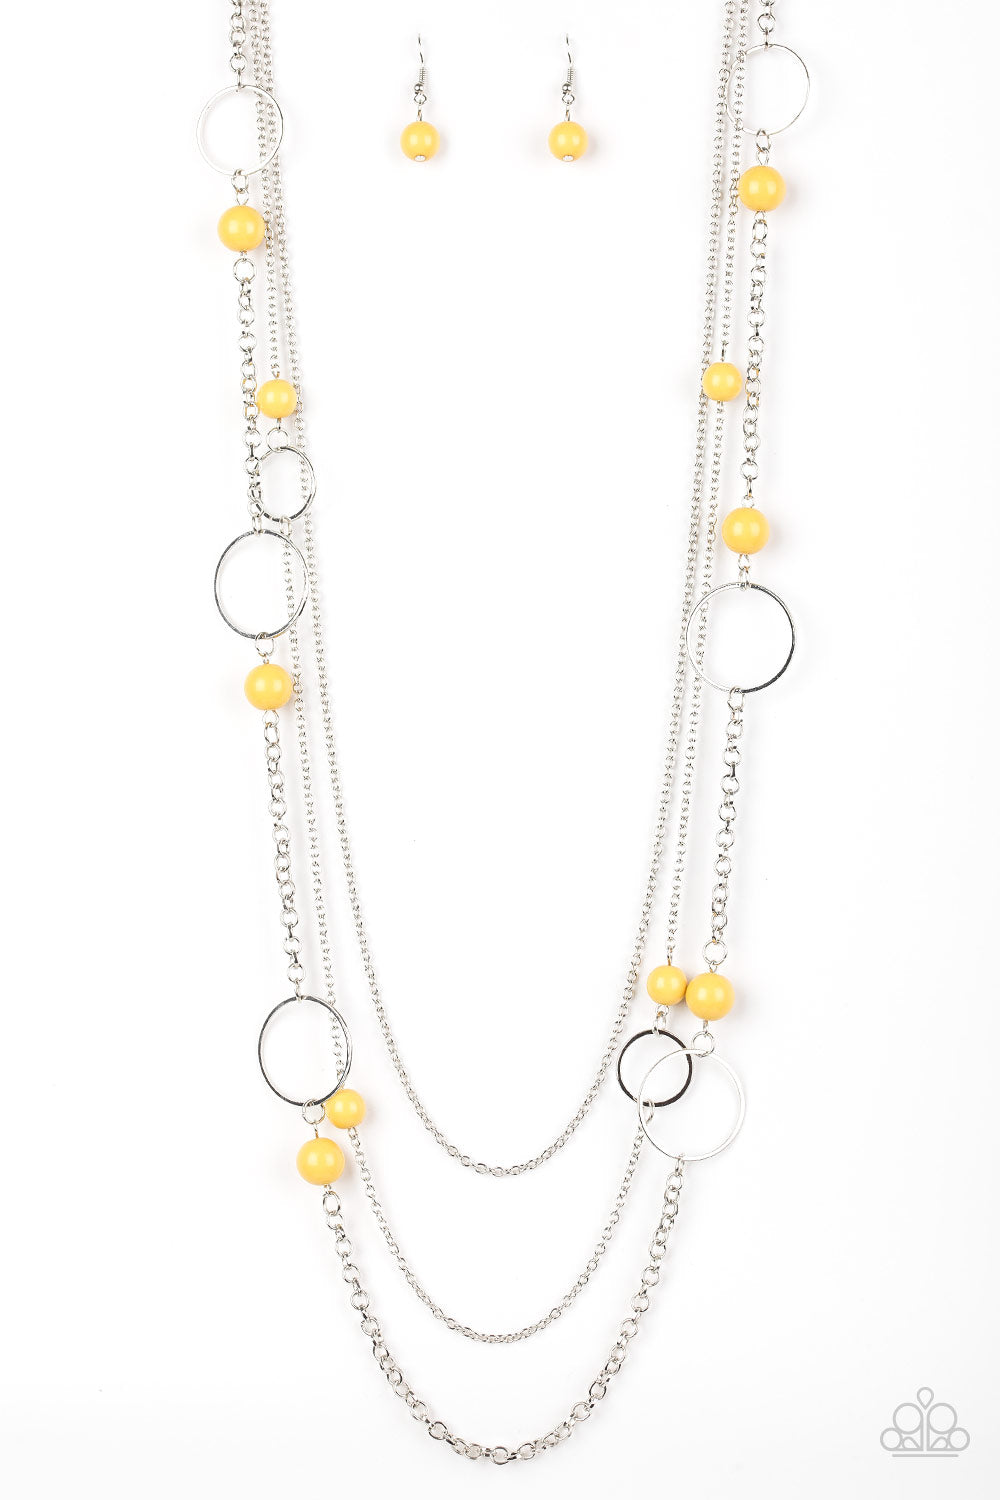 yellow necklace